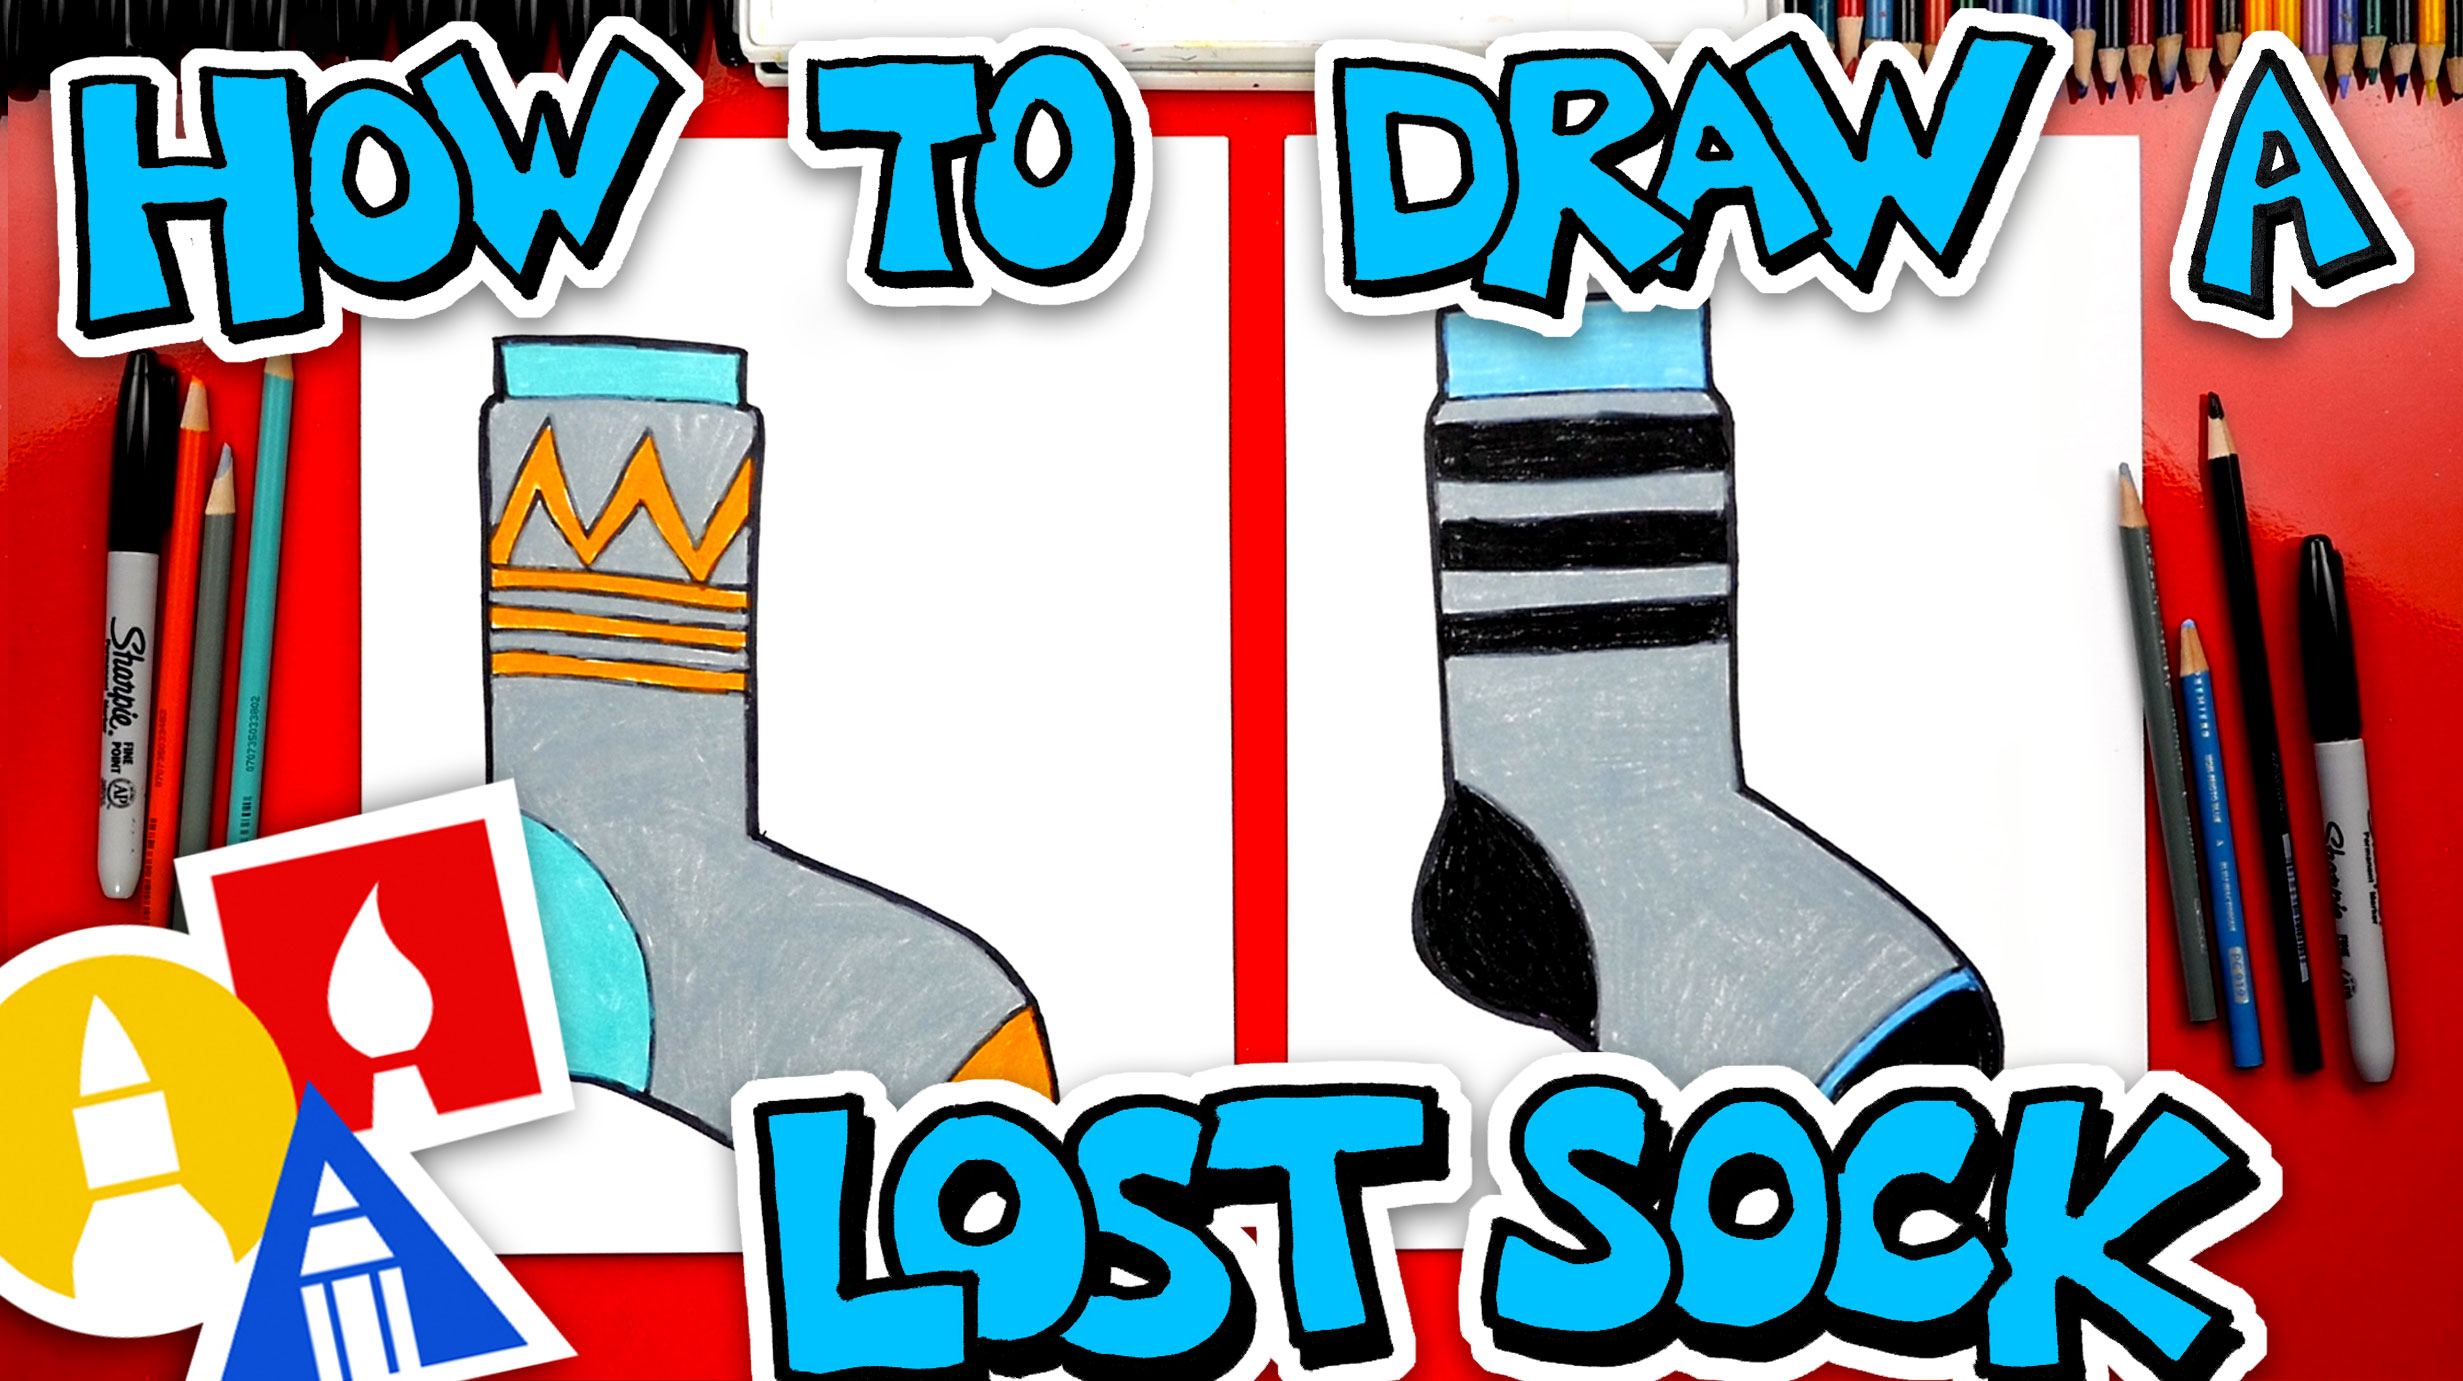 How To Draw A Lost Sock - Art For Kids Hub